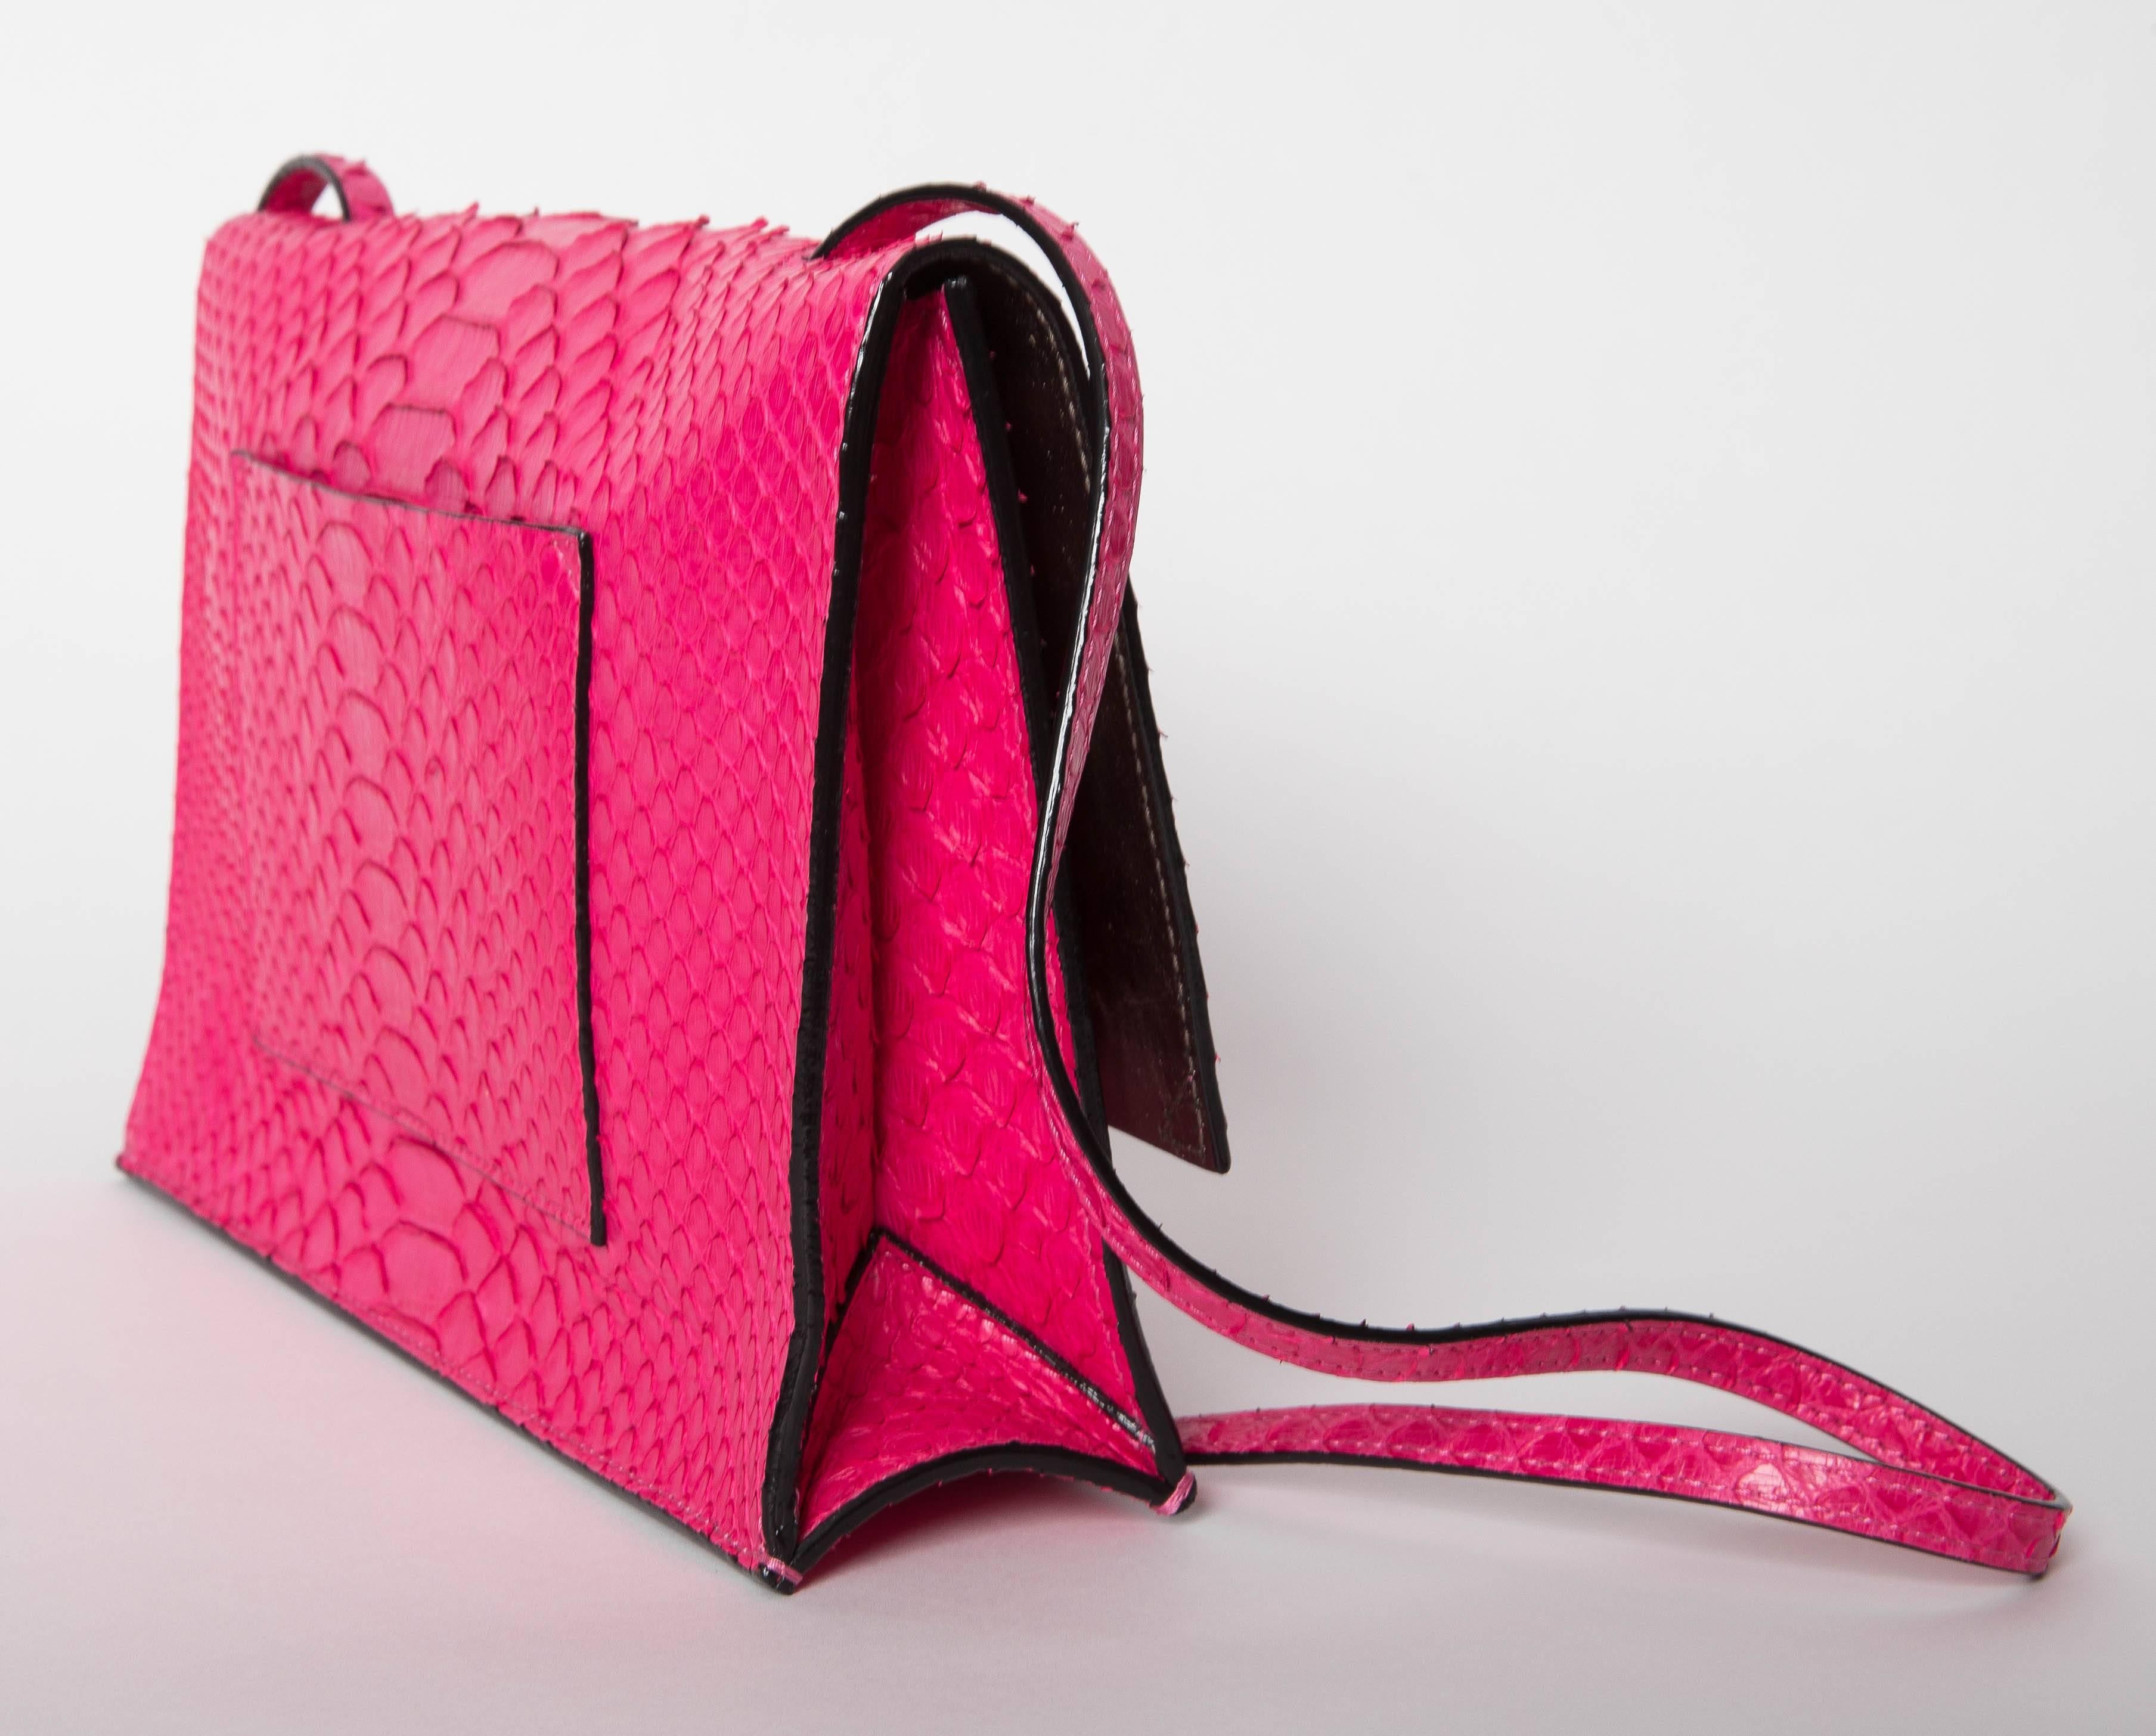 Proenza Schouler Hot Pink Python Shoulder Bag with Palladium Hardware In New Condition For Sale In Westhampton Beach, NY